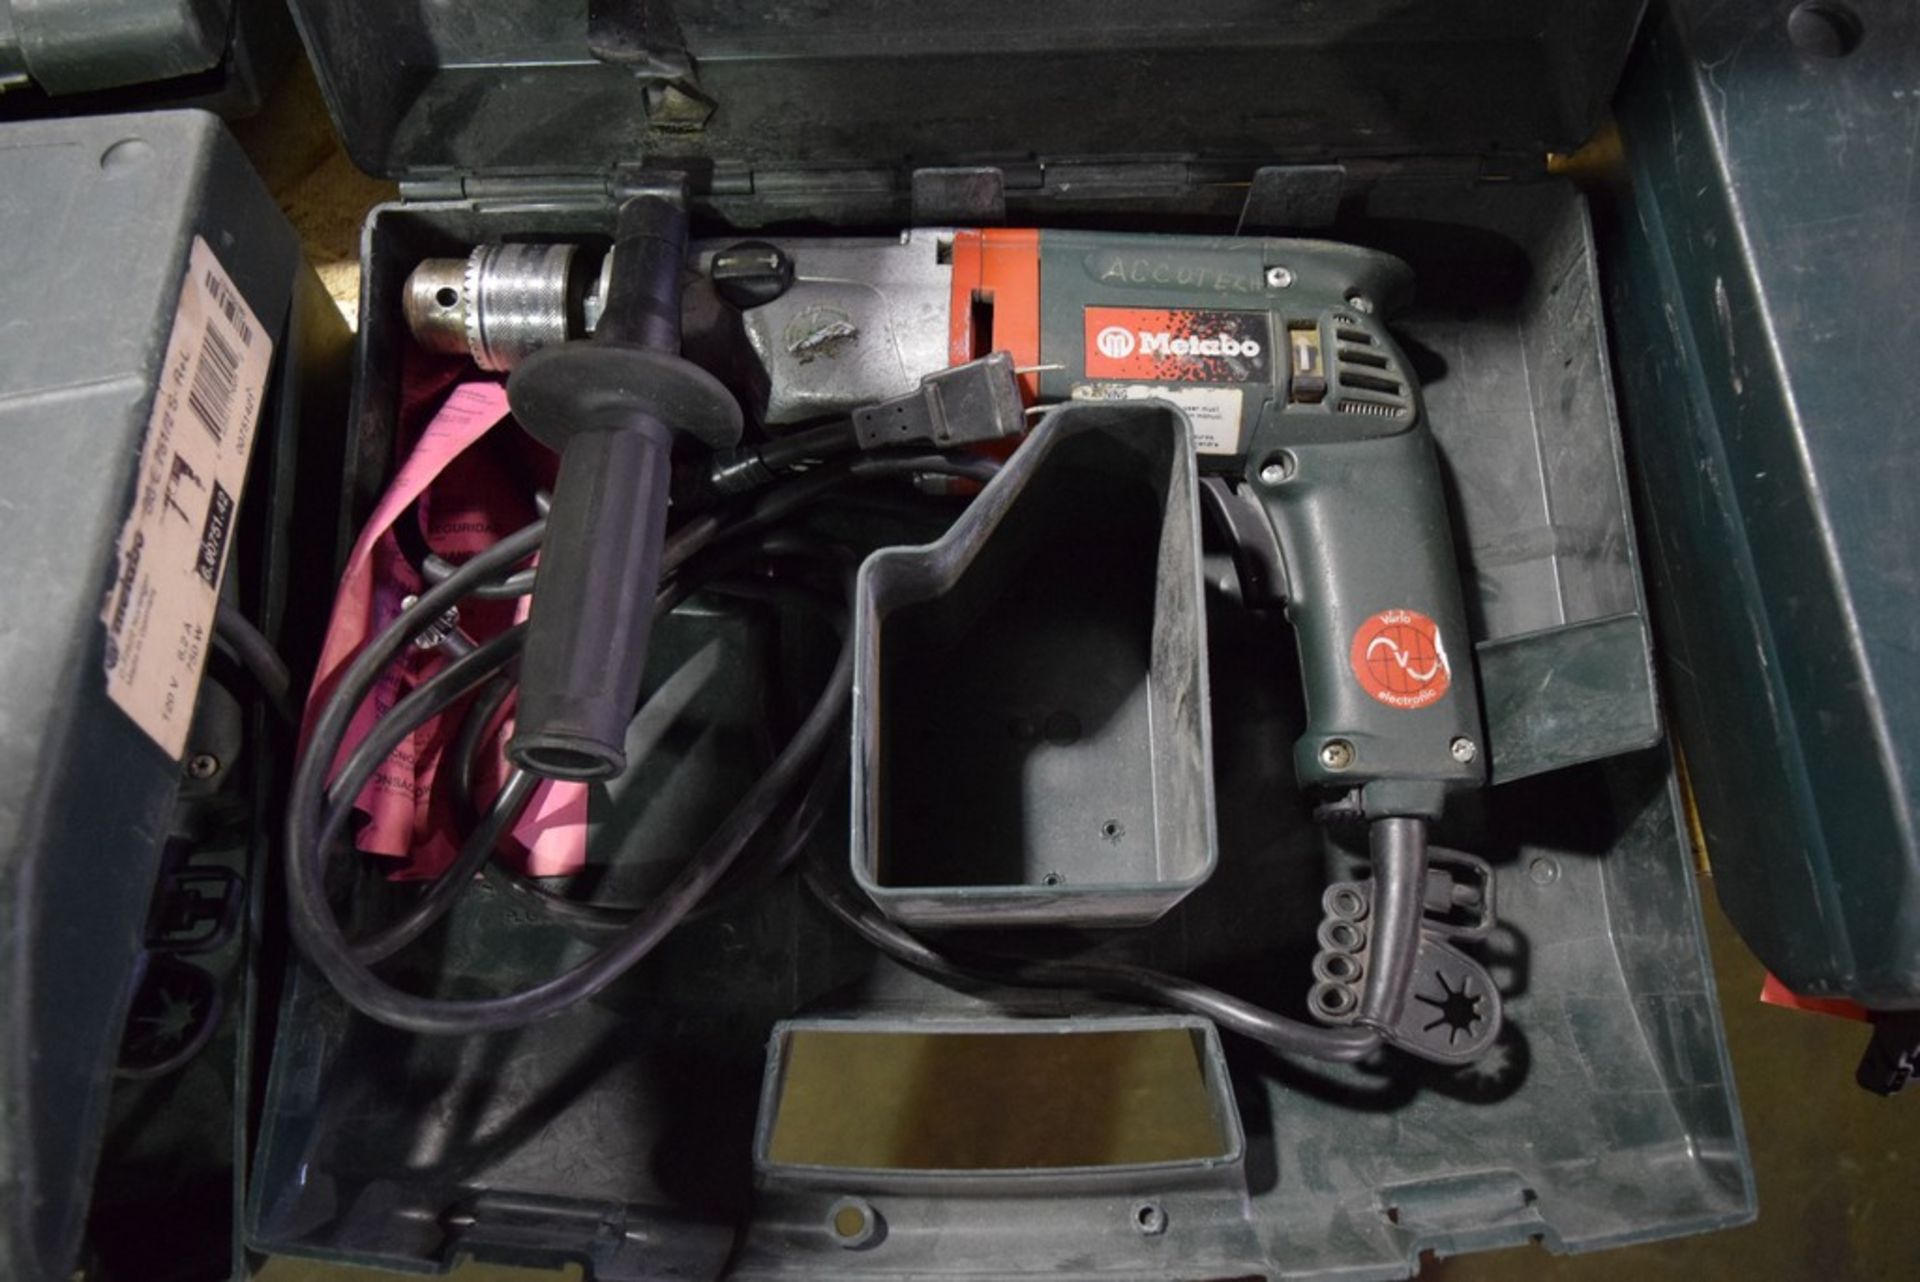 METABO MODEL 00751421 CORDED ELECTRIC DRILL IN CASE - Image 2 of 2